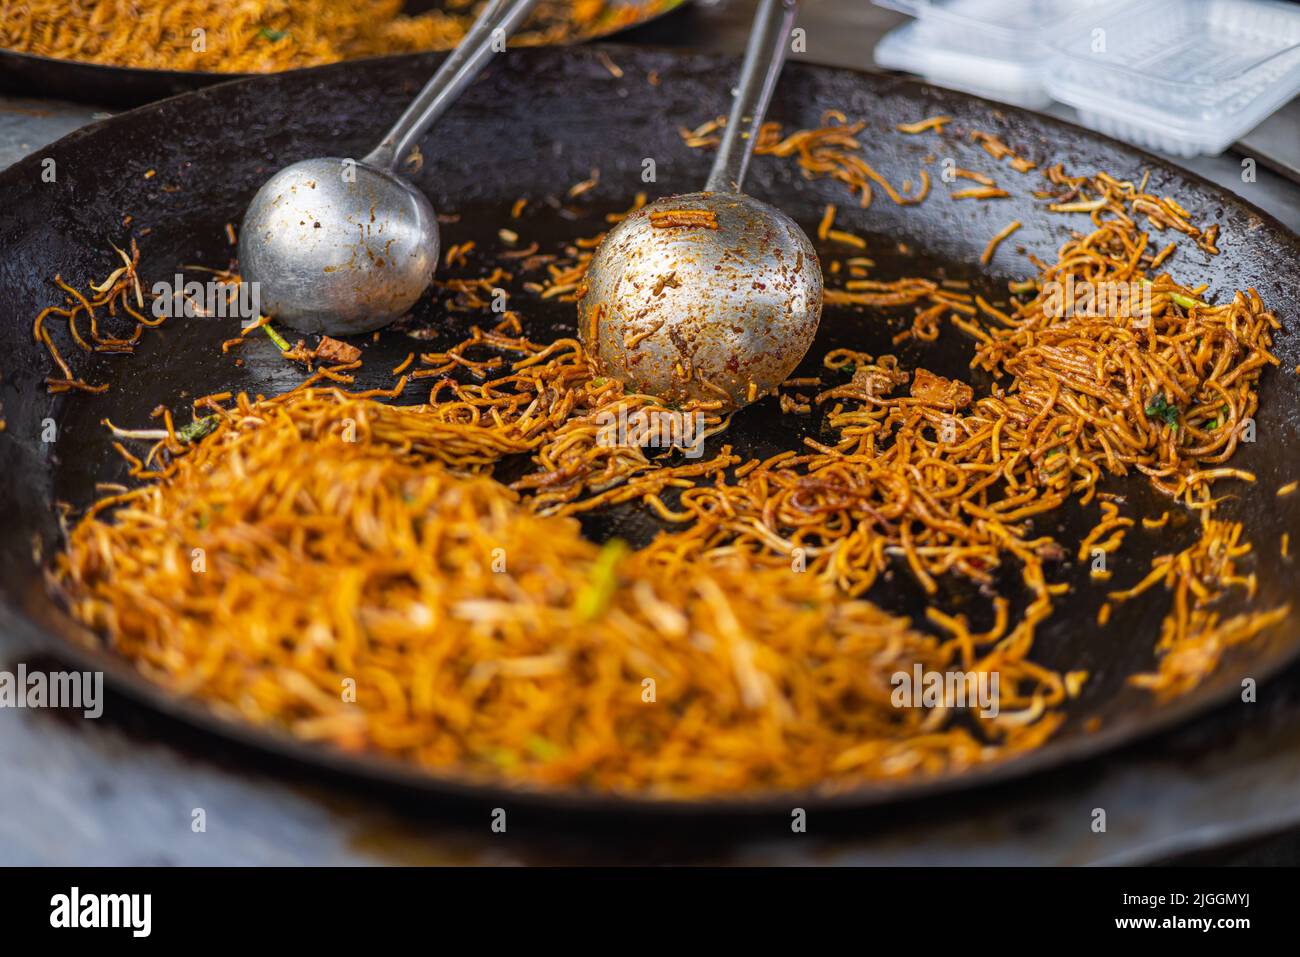 Fried Noodles in a pan on a street food market in Kuala Lumpur, Malaysia. Selective Focus on the trowel. Street food markets a famous and well known f Stock Photo